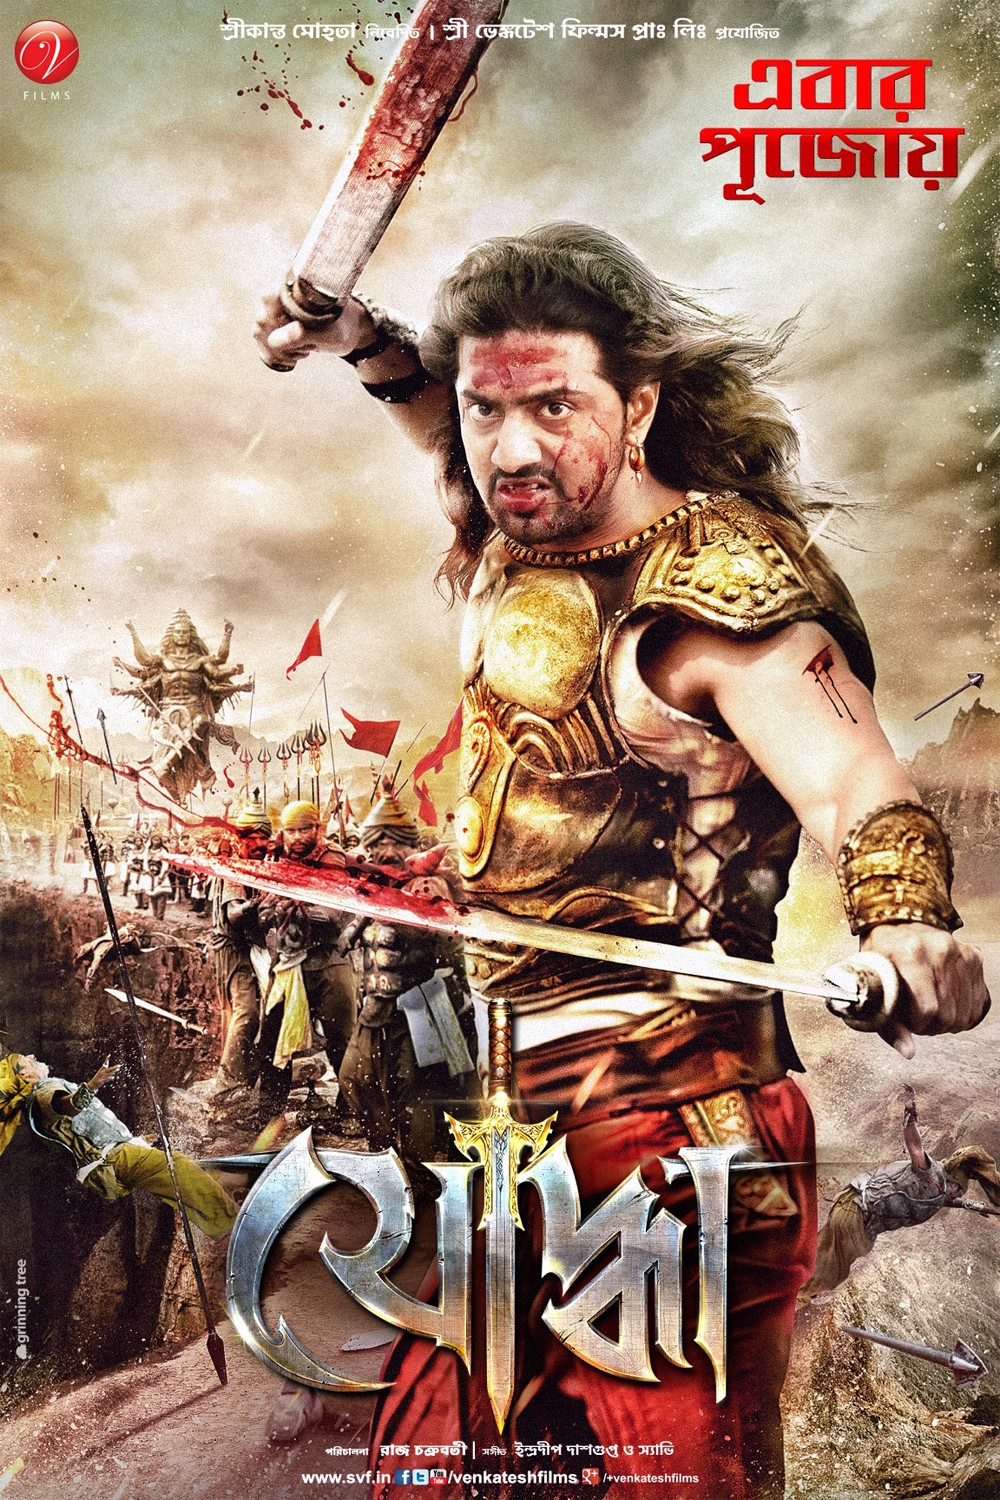 Extra Large Movie Poster Image for Yoddha The Warrior (#1 of 7)